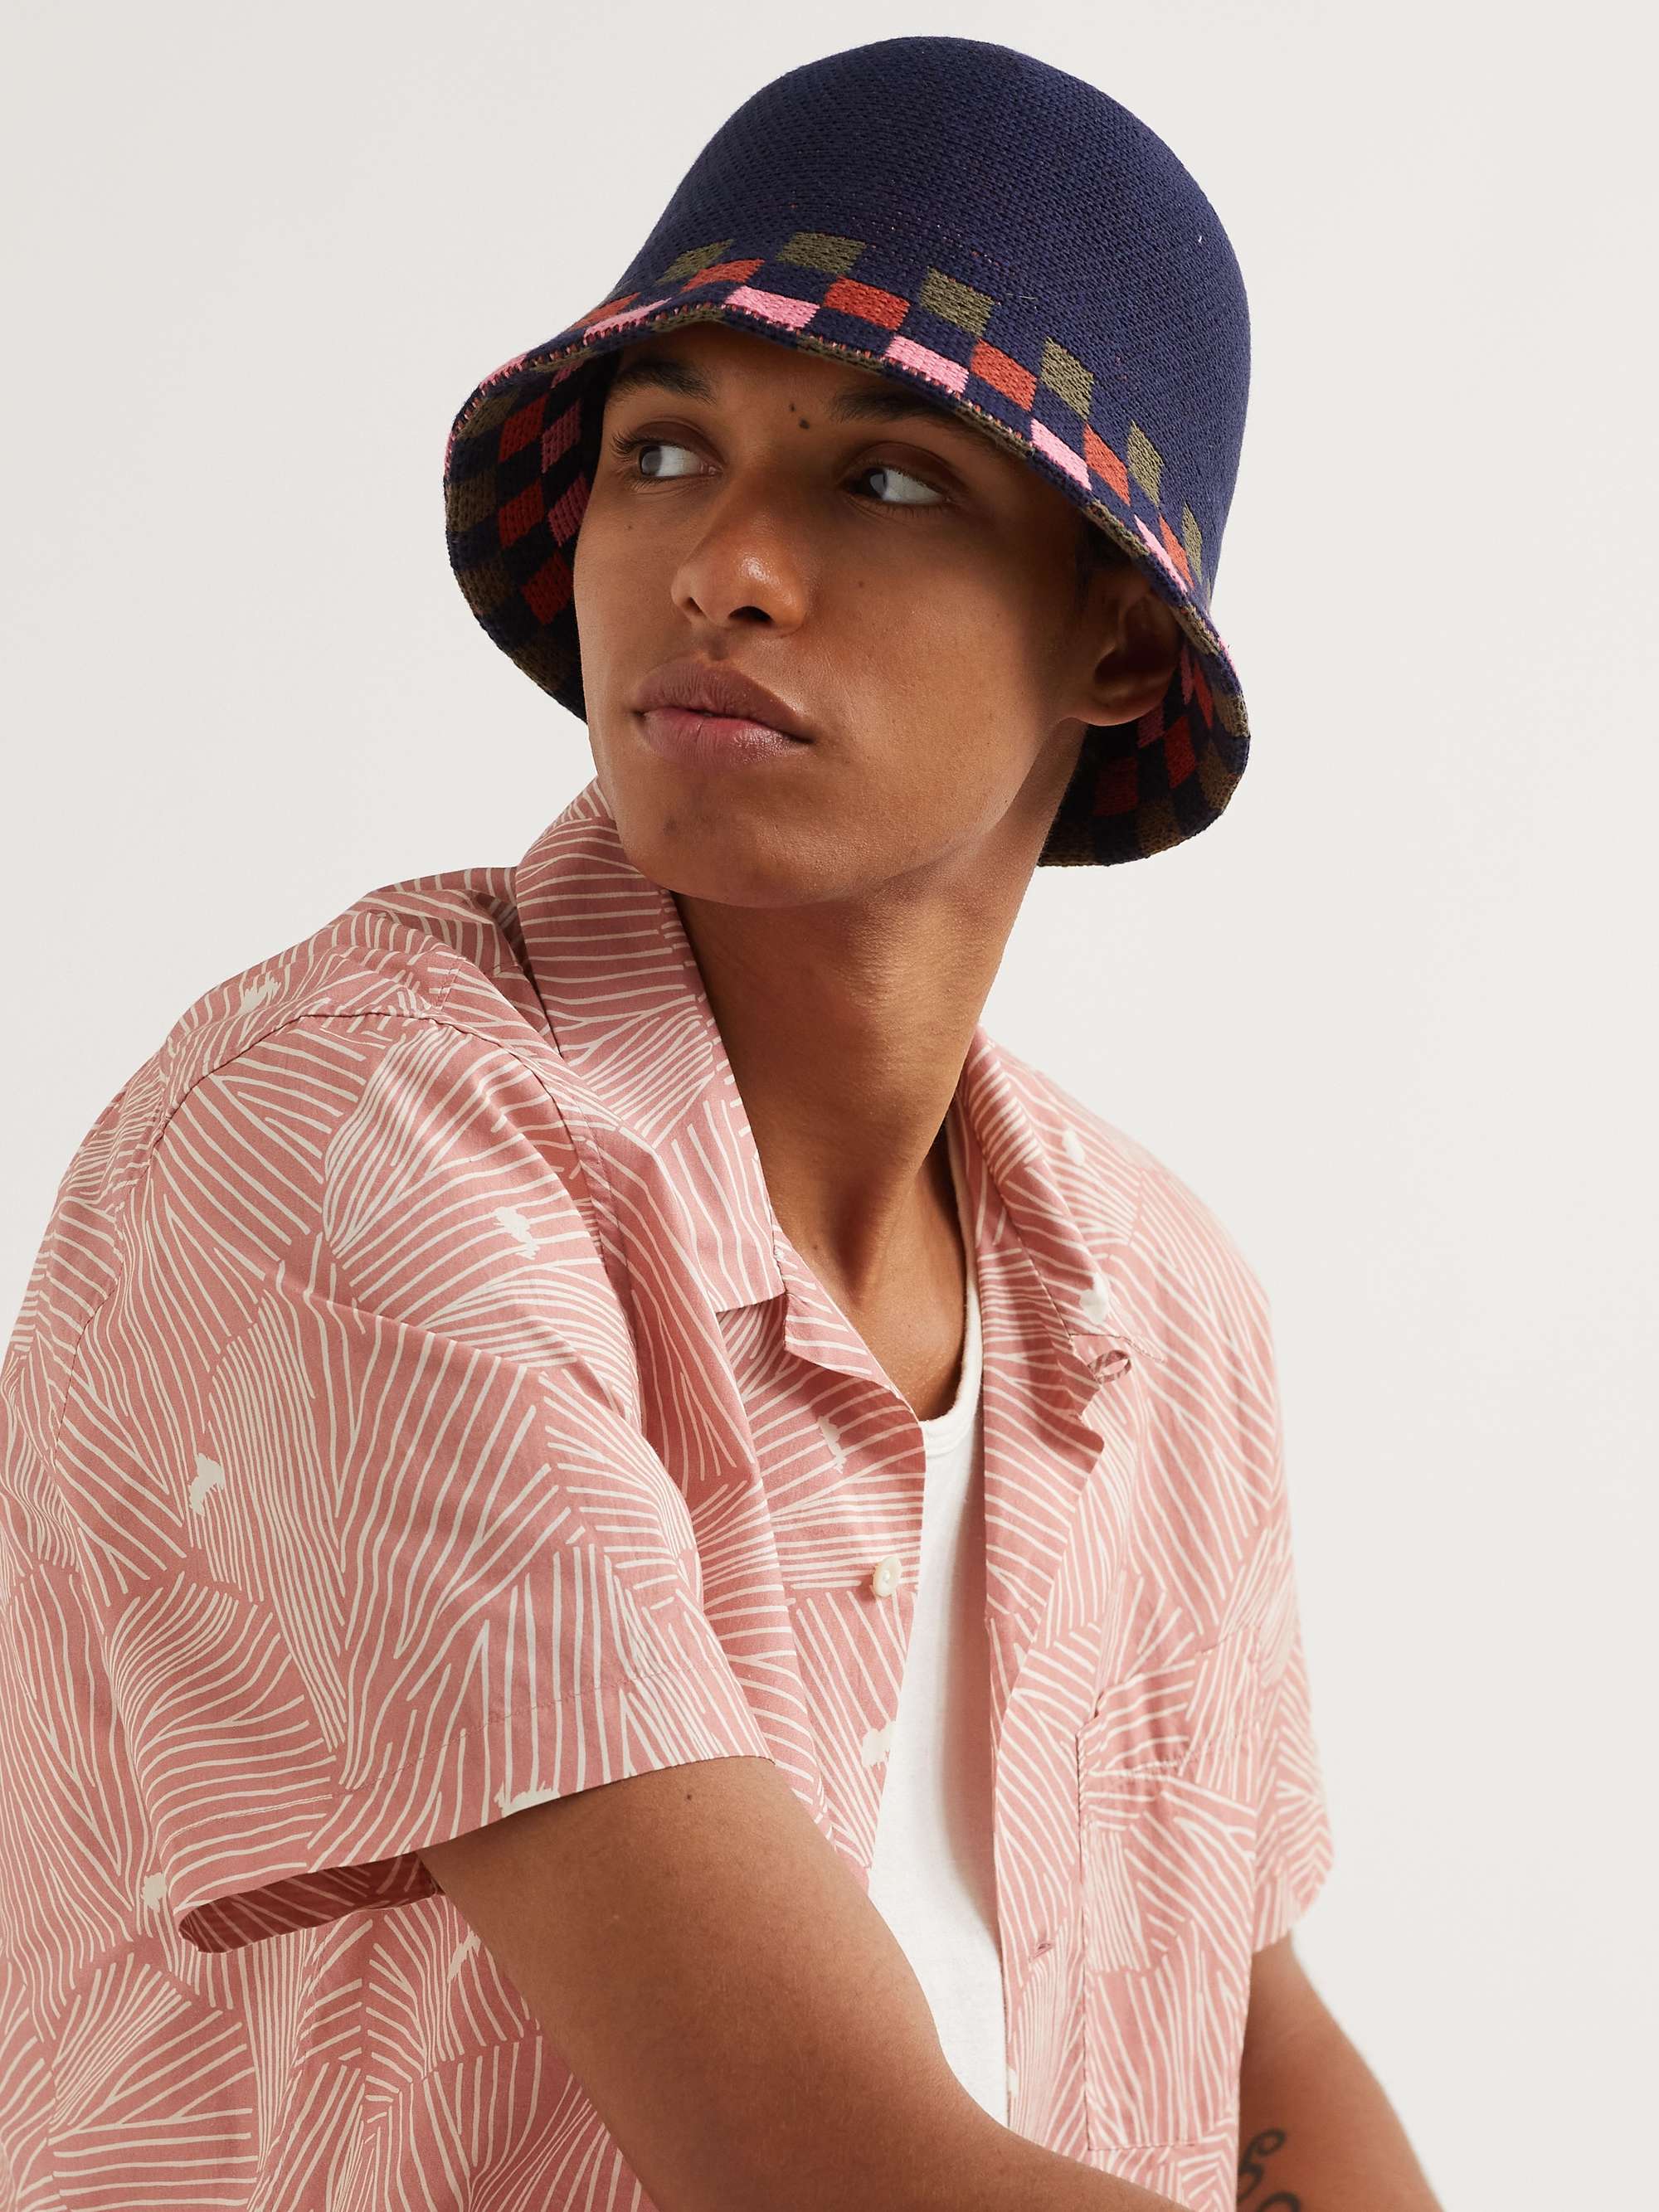 Blue Checked Crocheted Bucket Hat | PAUL SMITH | MR PORTER